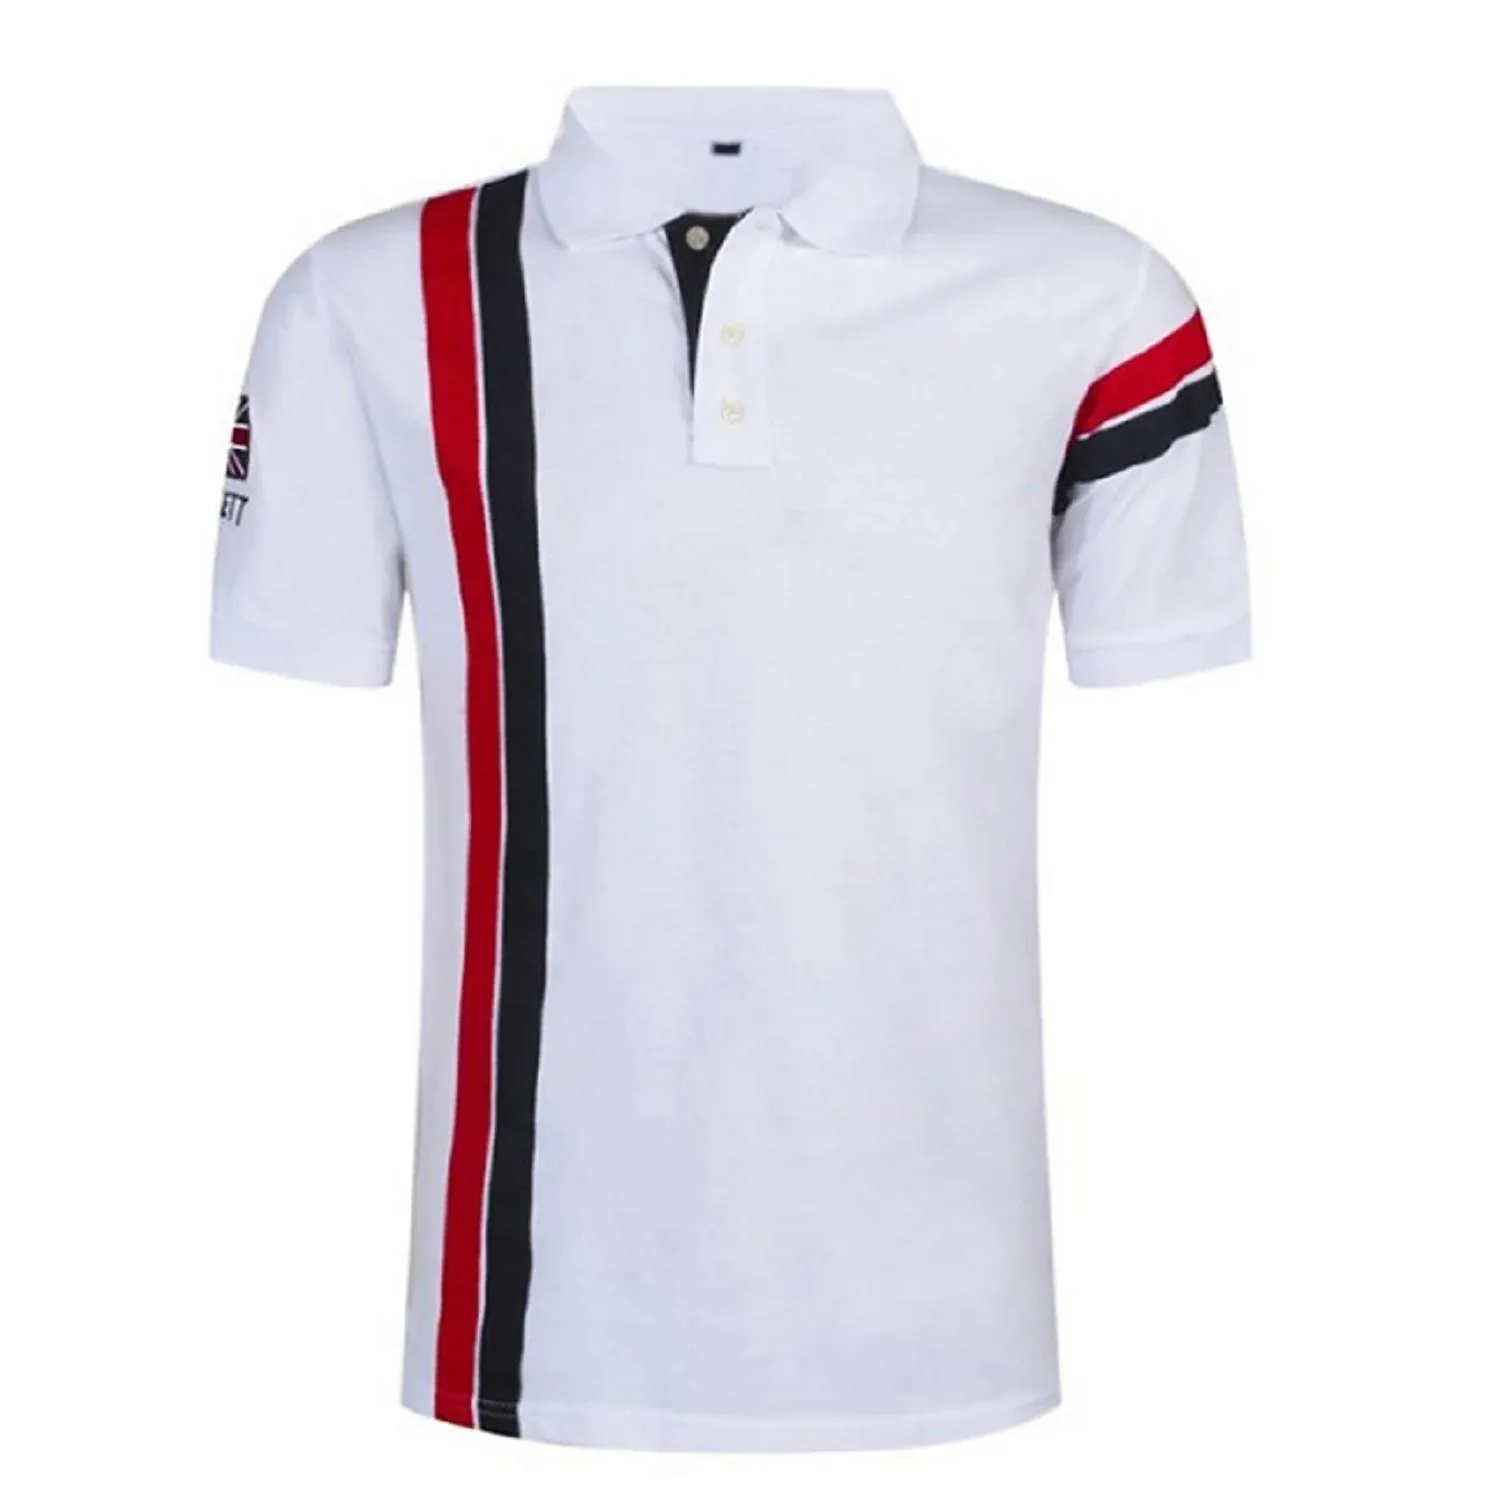 Men's POLO Golf Shirt Tennis Striped Short Sleeve Sports & Outdoor Tops Casual Daily Sporty Collar White British style Red Navy Blue